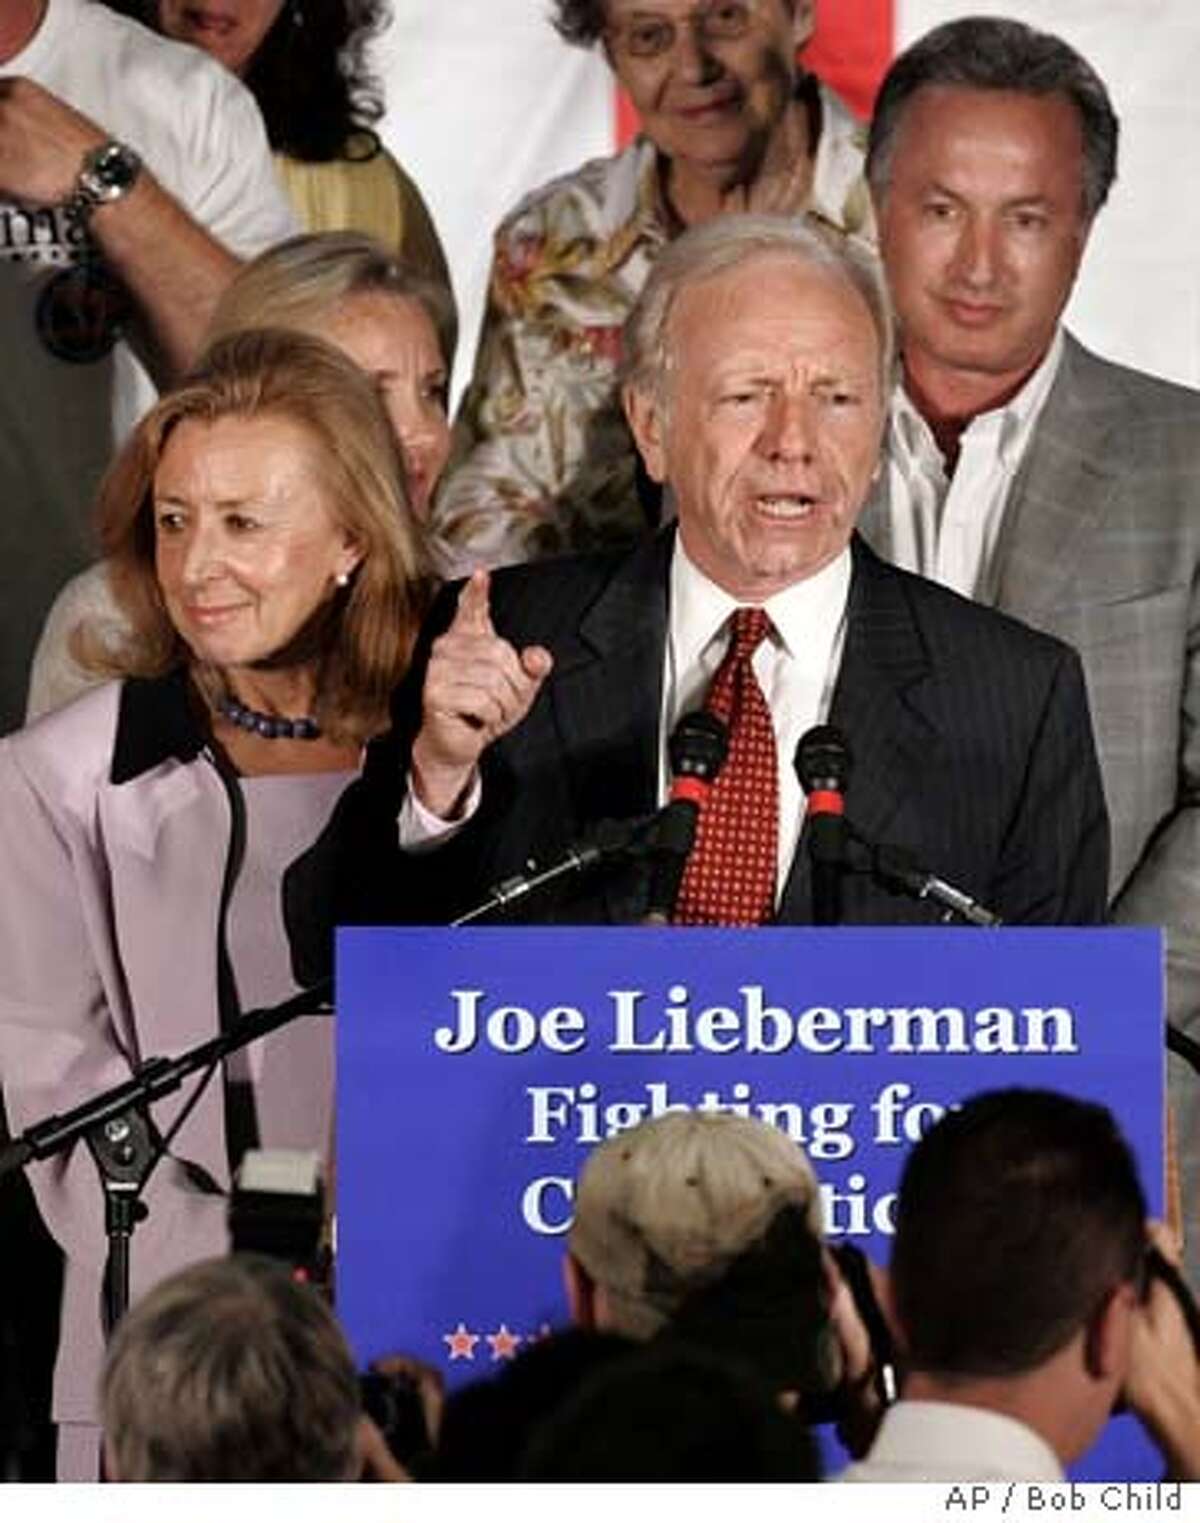 Incumbent party-endorsed Democratic U.S. Sen. Joseph I. Lieberman makes a point as he spoke in Hartford, Conn., Tuesday, Aug. 8, 2006 after he was defeated in a primary by Ned Lamont. Lieberman said he would run as an independent. His wife Hadassah is at left. (AP Photo/Bob Child)